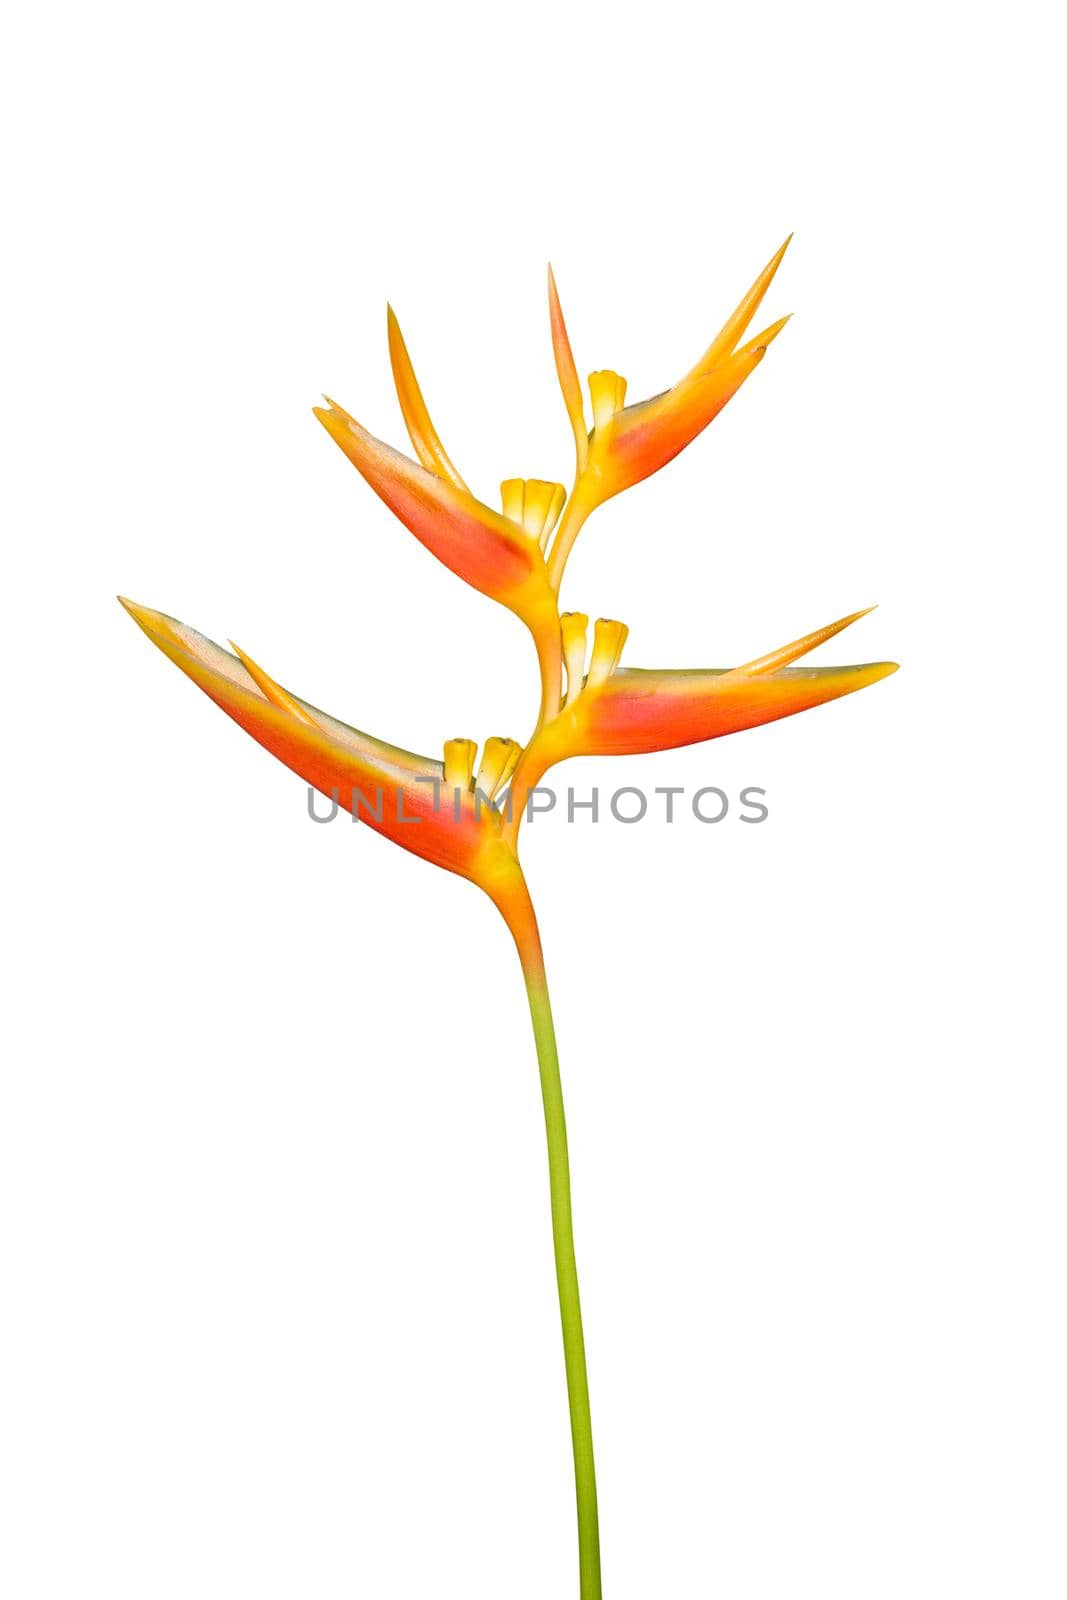 Bird of Paradise Flower isolated on white background, clipping path by Kumma